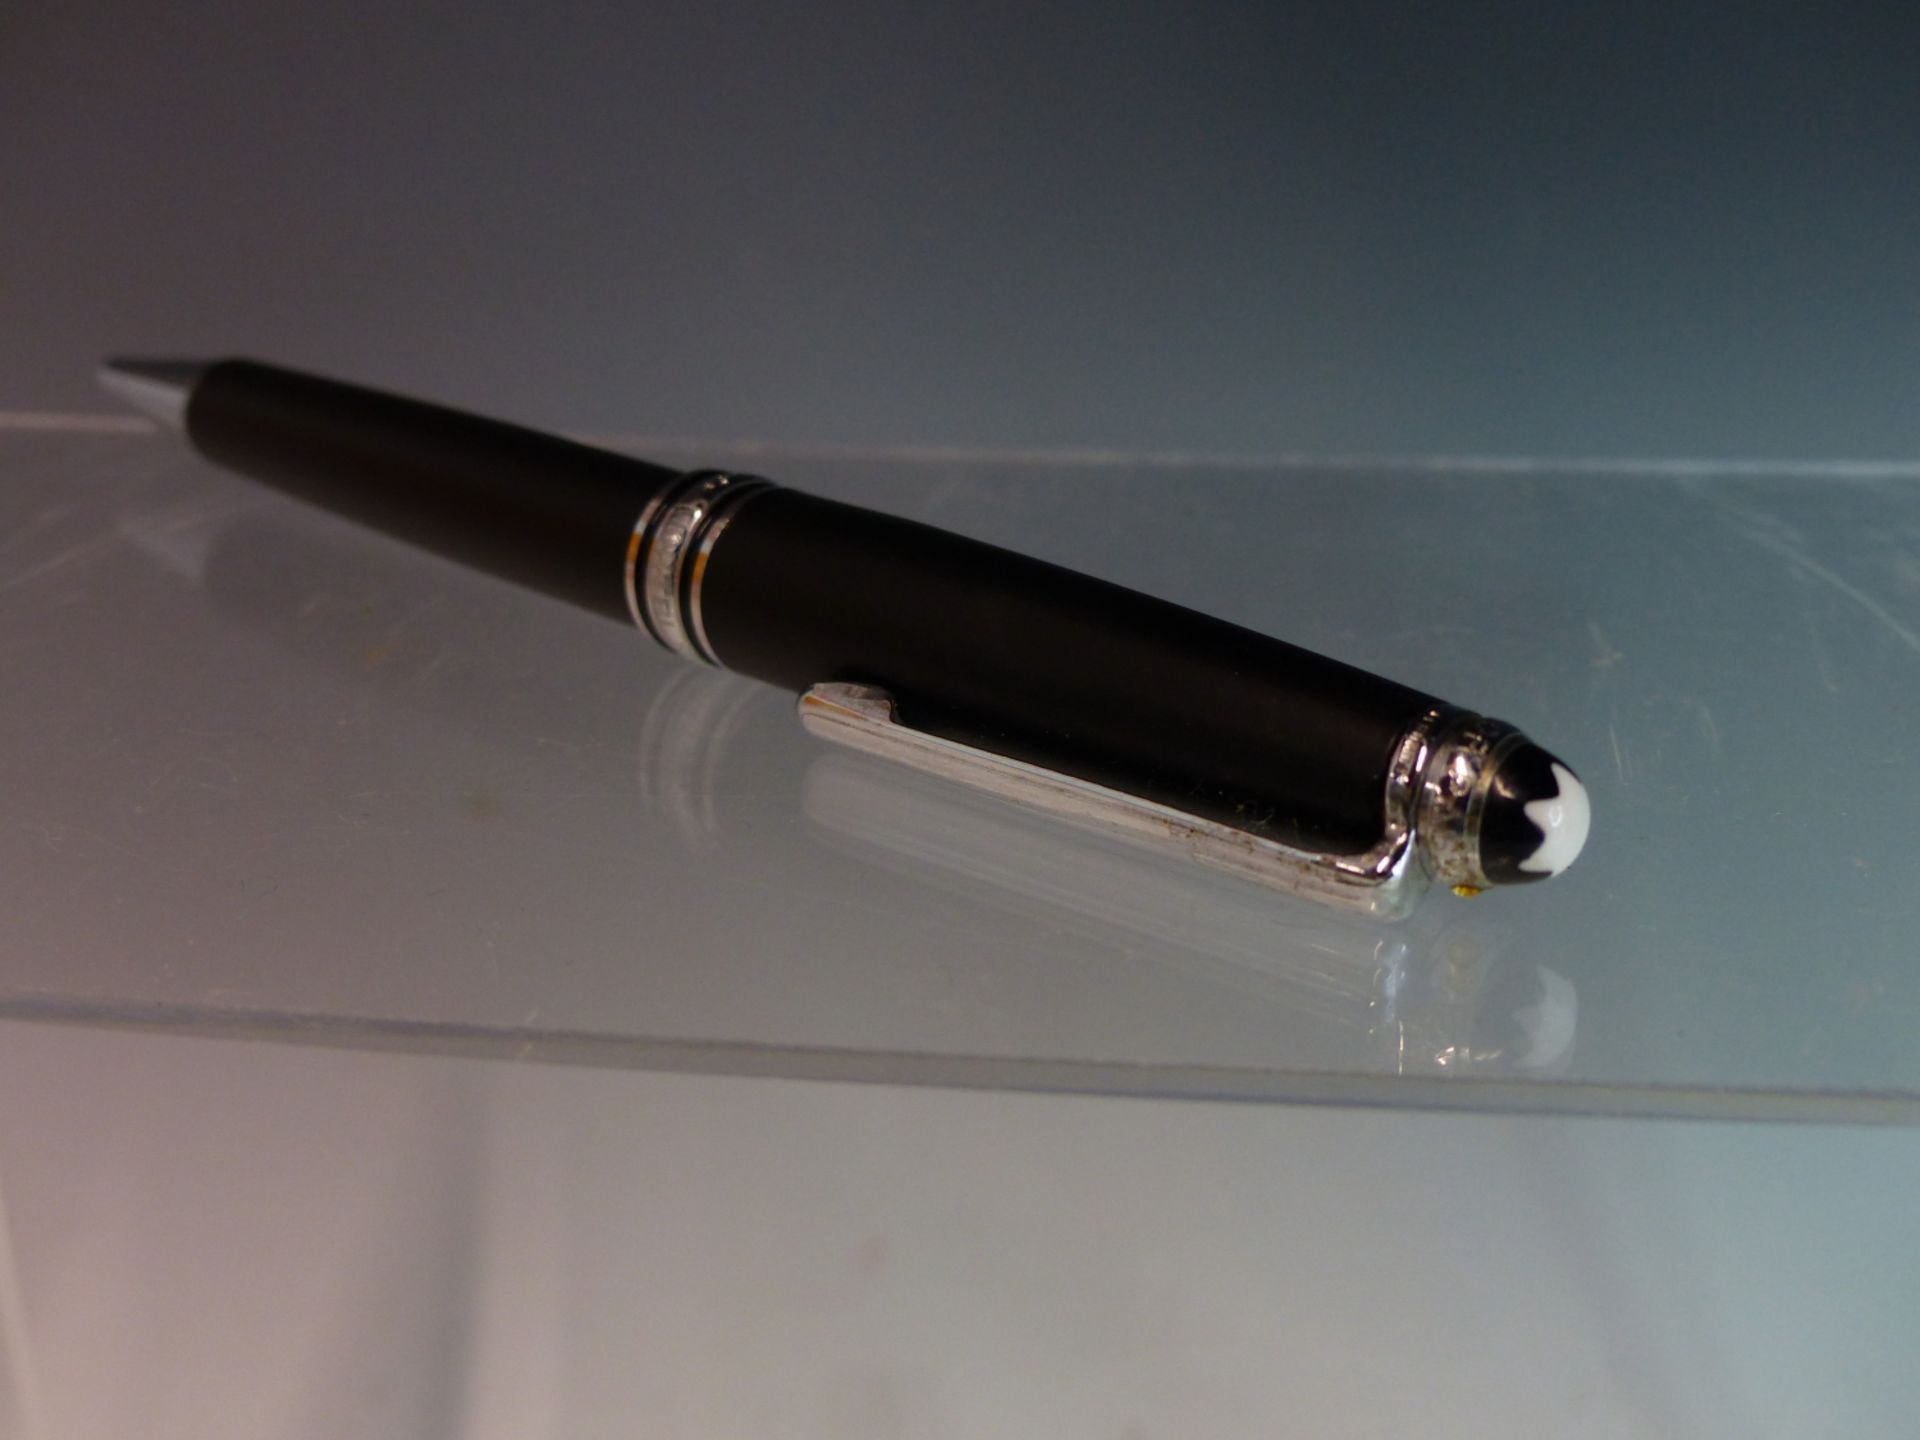 A MONT BLANC MEISTERSTUCK BALL POINT PEN. THE CAP BAND INSCRIBED 75 YEARS OF PASSION. - Image 2 of 5